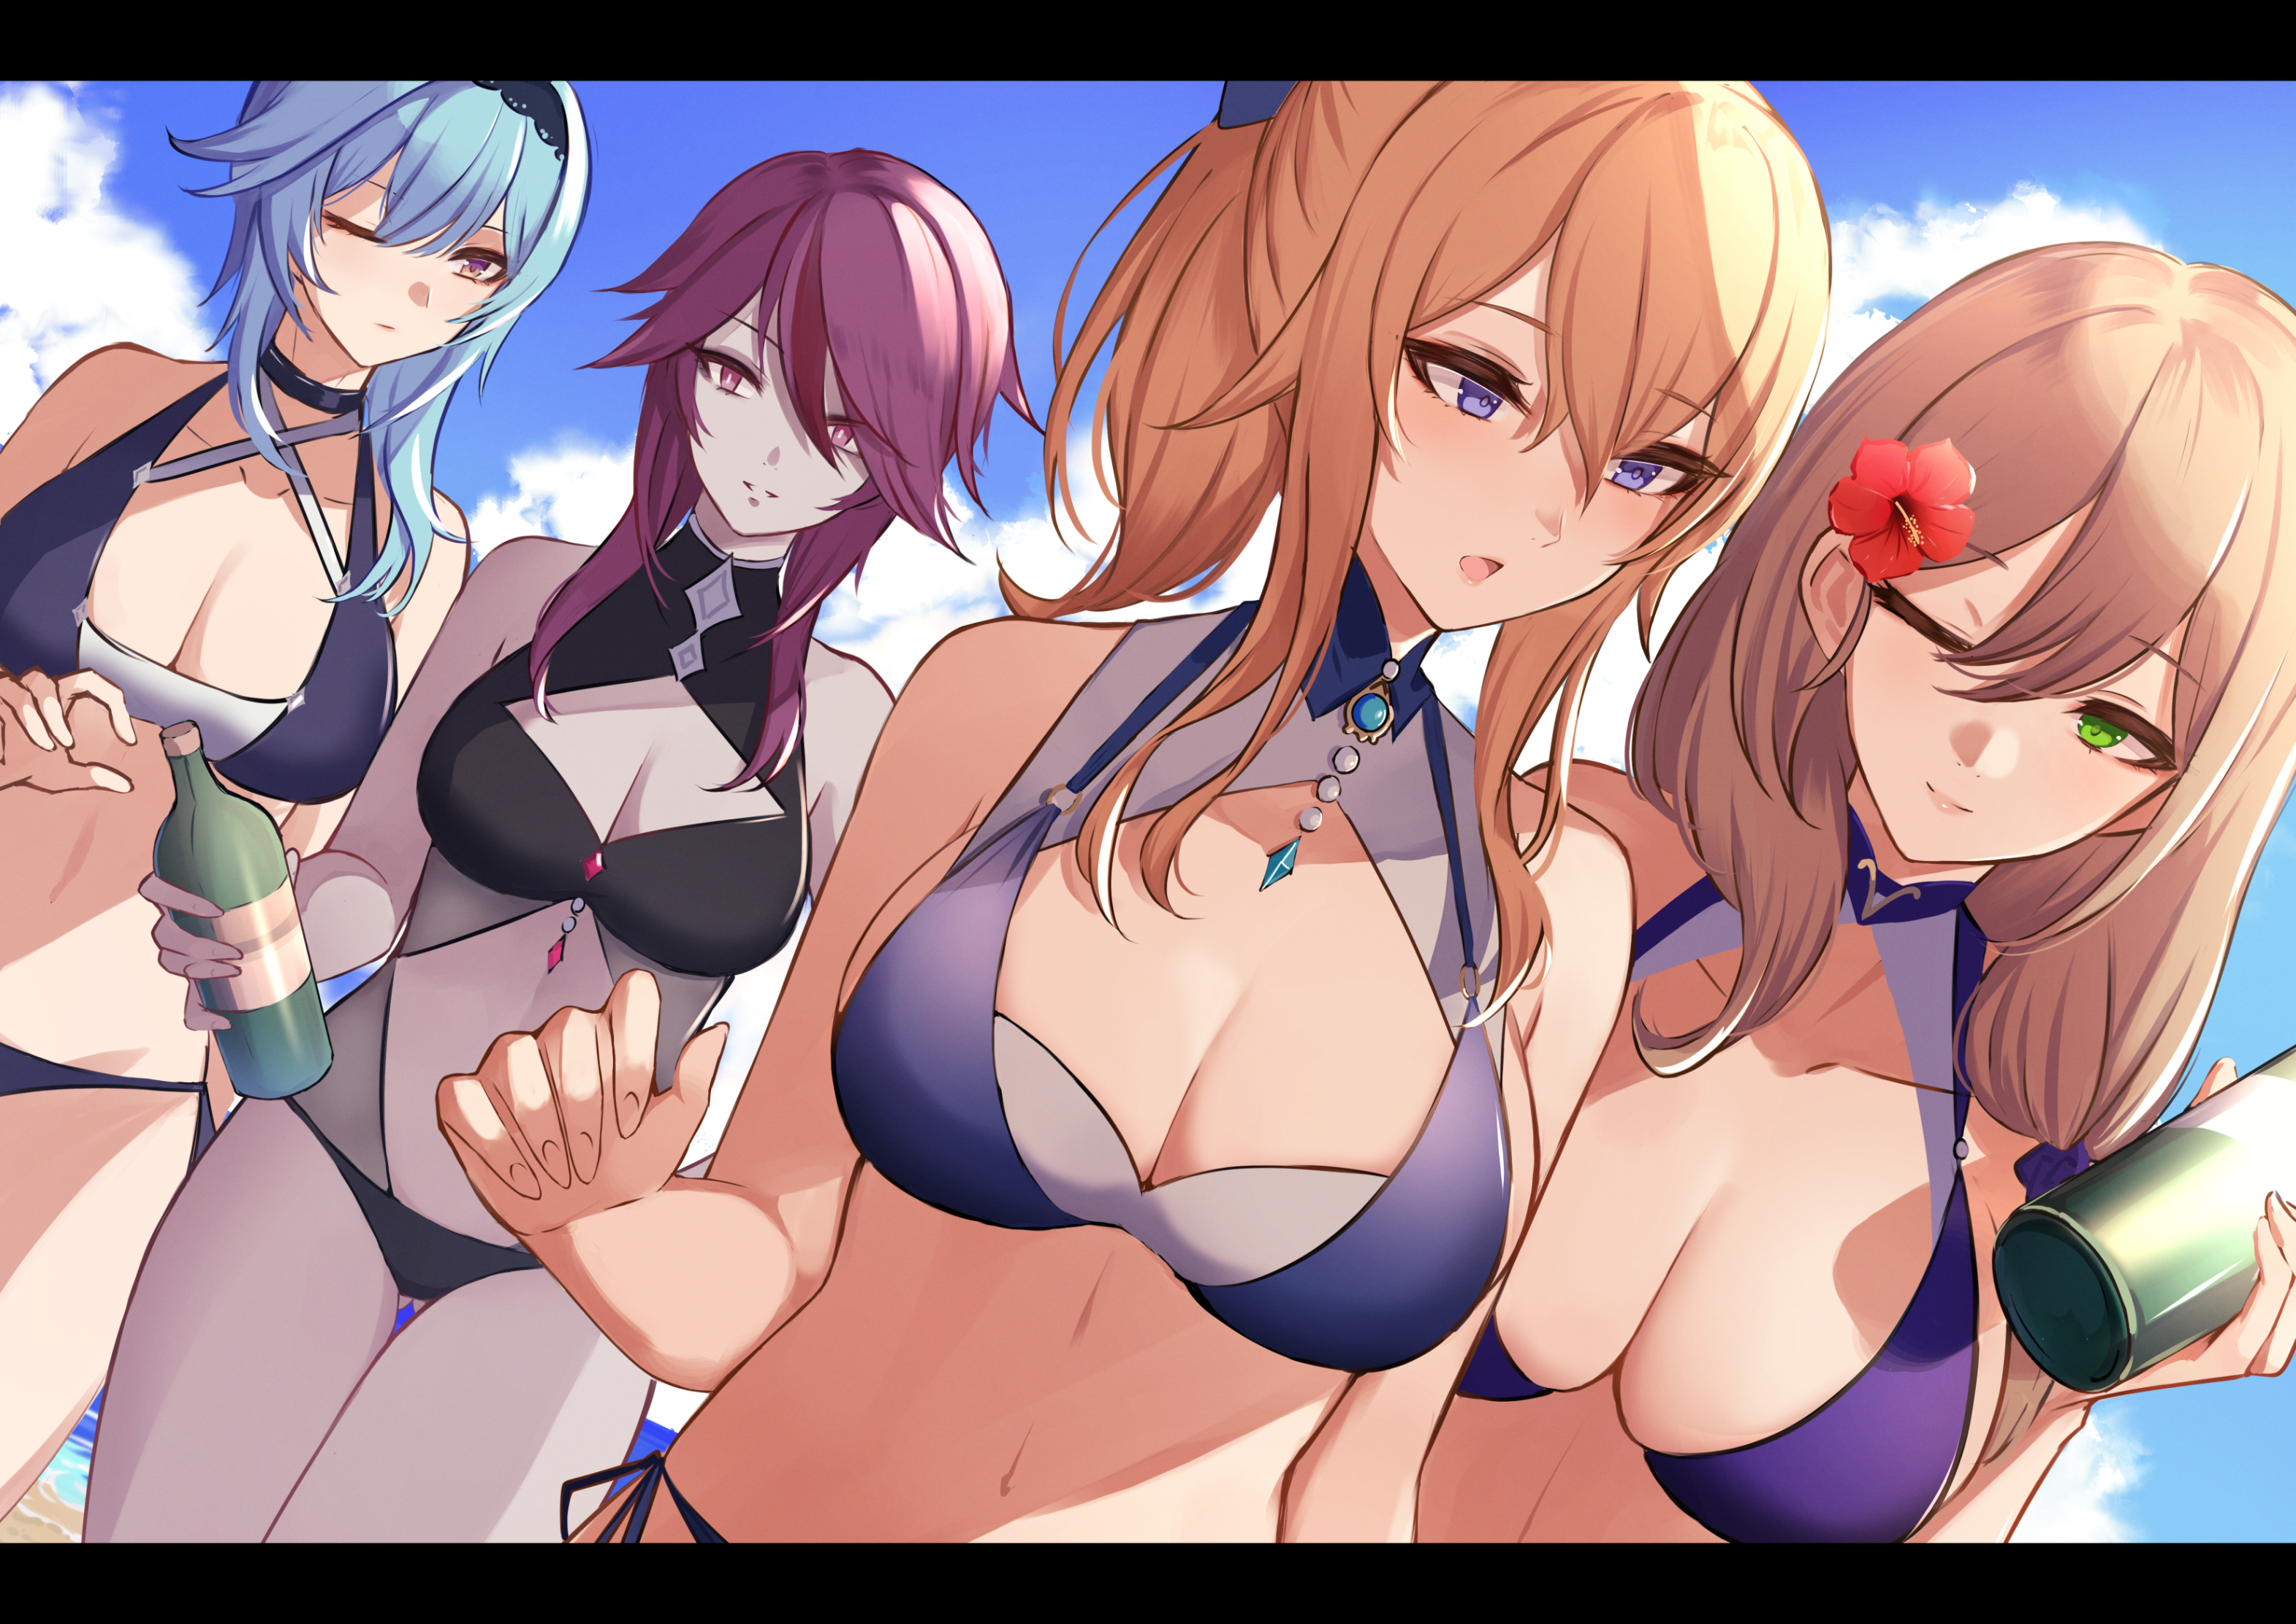 Anime 3142x2222 anime girls anime Eula (Genshin Impact) Rosaria (Genshin Impact) Lisa (Genshin Impact) Jean (Genshin Impact) Genshin Impact bikini cleavage women quartet hibiscus cleavage cutout flower in hair flowers group of women clouds one eye closed